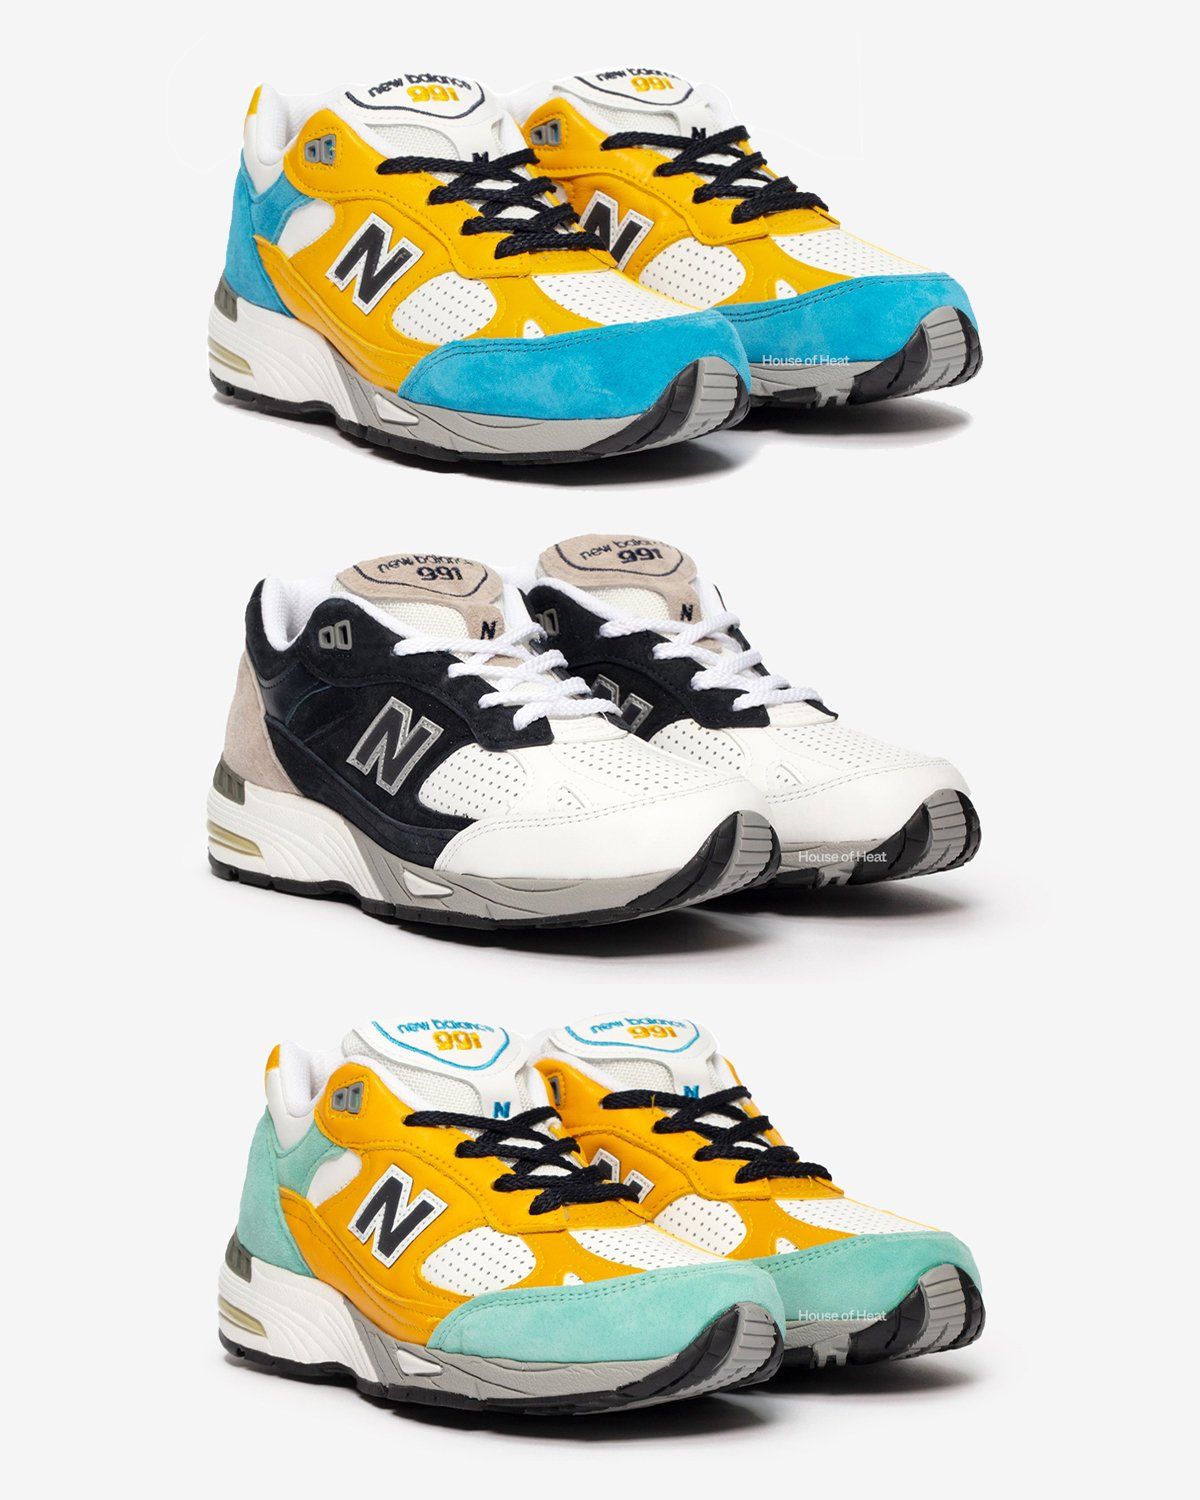 sake nitrogen Sculpture SNS x New Balance 991 "Perforated Pack" Releases February 26 | HOUSE OF HEAT